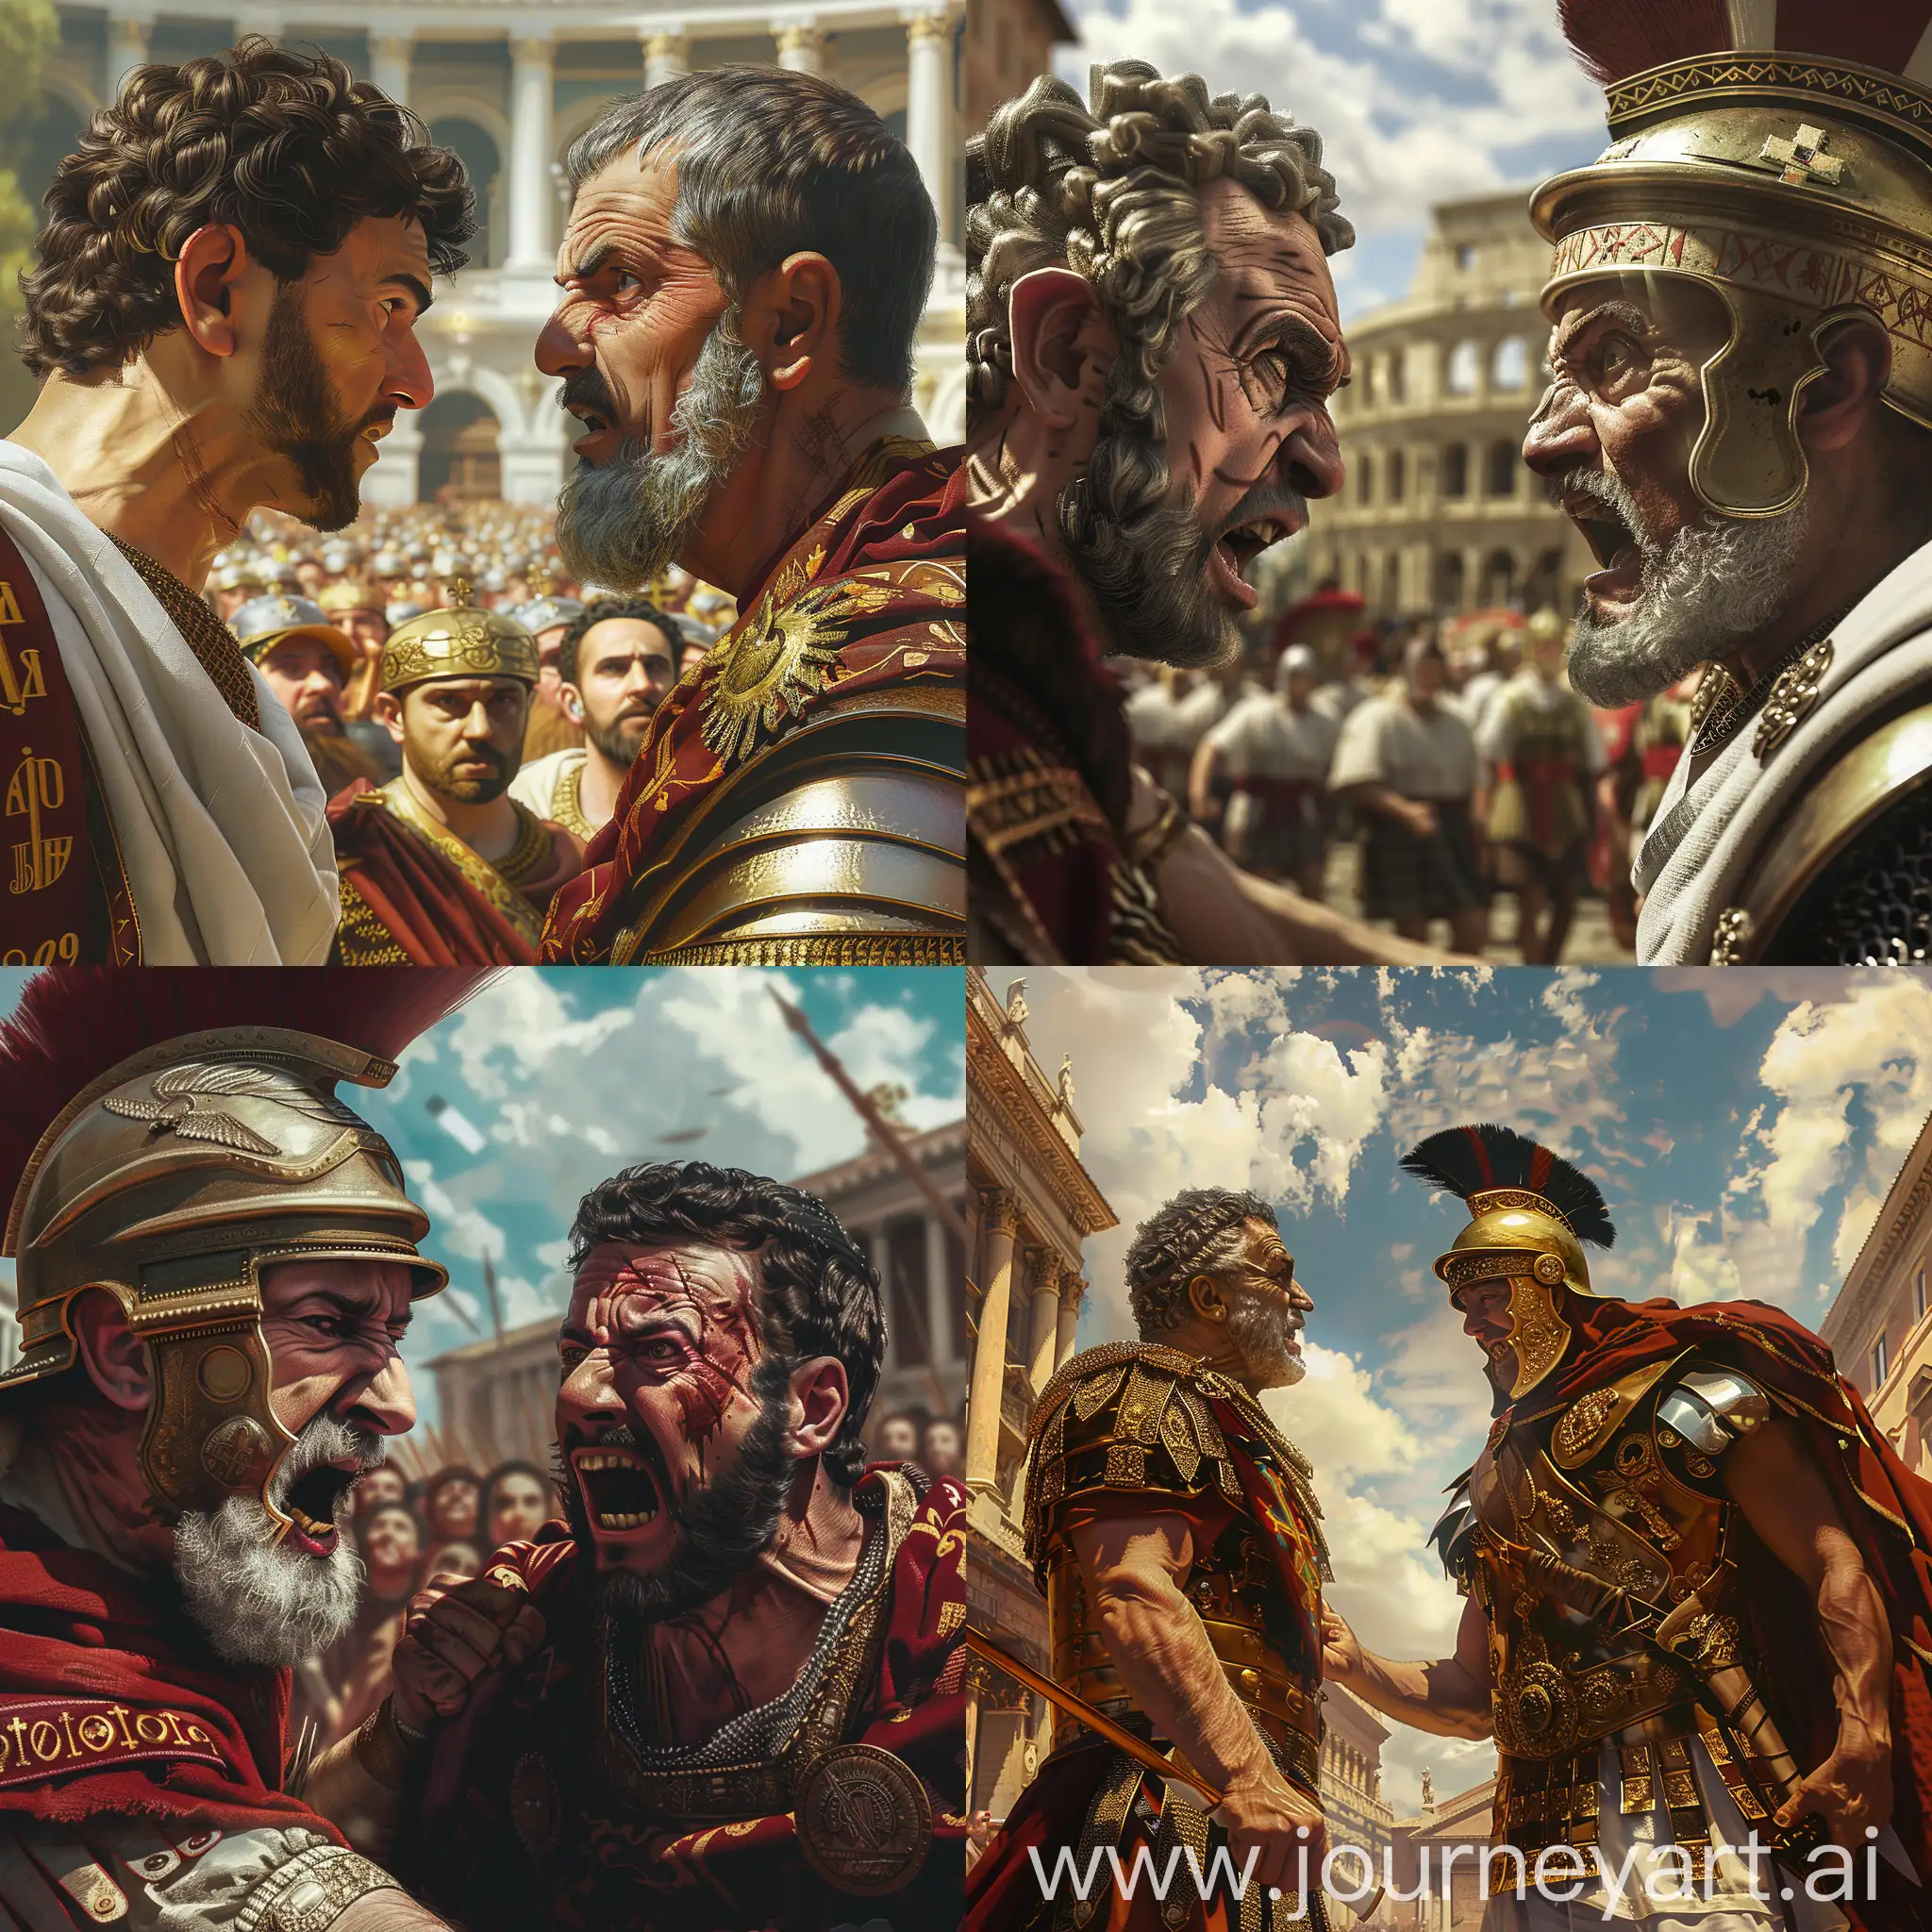 Emperor-Diocletian-Confronts-Saint-George-in-Ancient-Rome